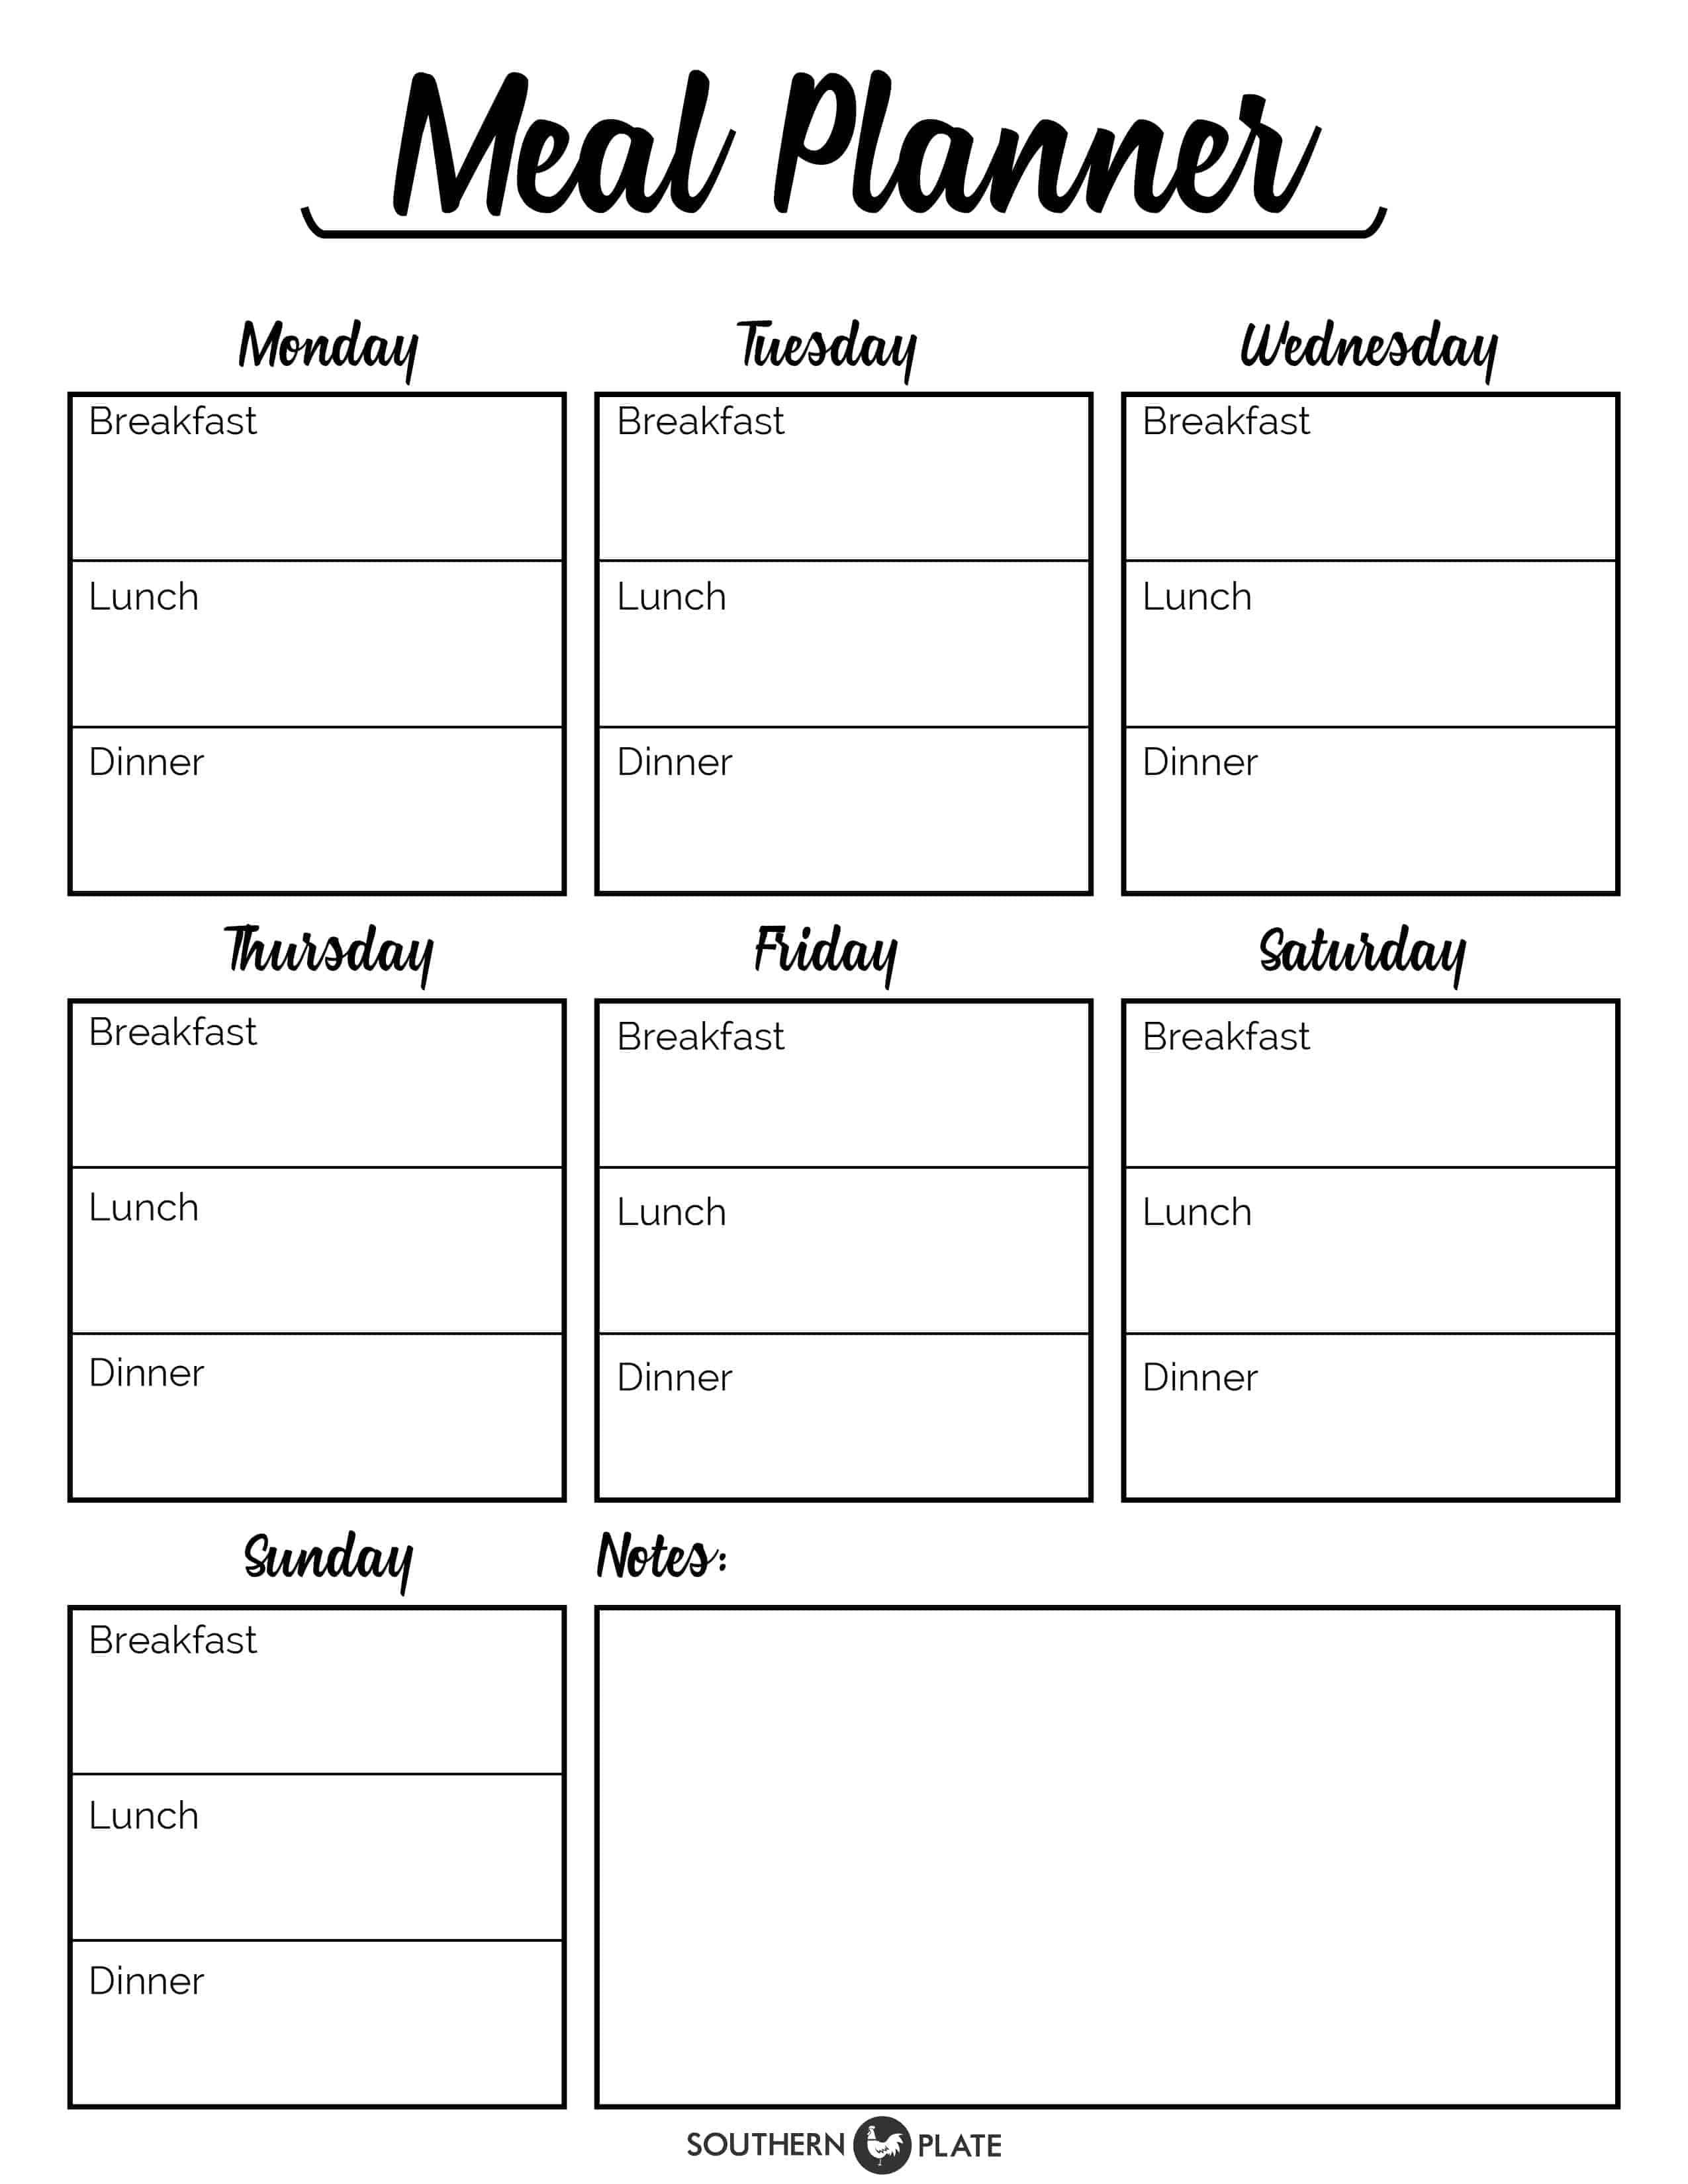 free-meal-planning-printables-meal-planner-printable-meal-planning-printable-dinner-planner